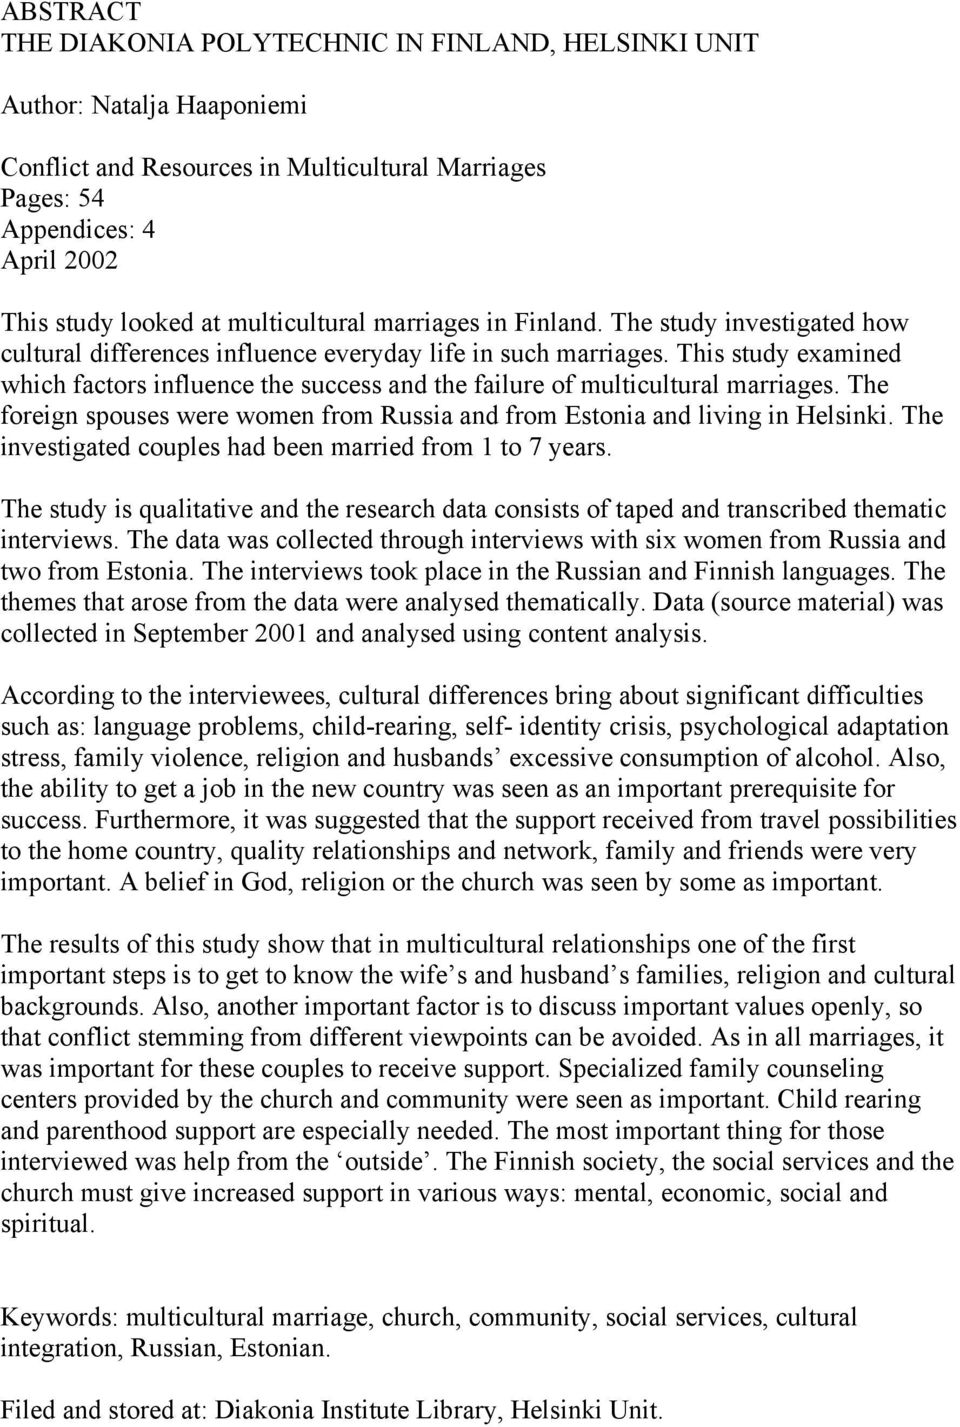 This study examined which factors influence the success and the failure of multicultural marriages. The foreign spouses were women from Russia and from Estonia and living in Helsinki.